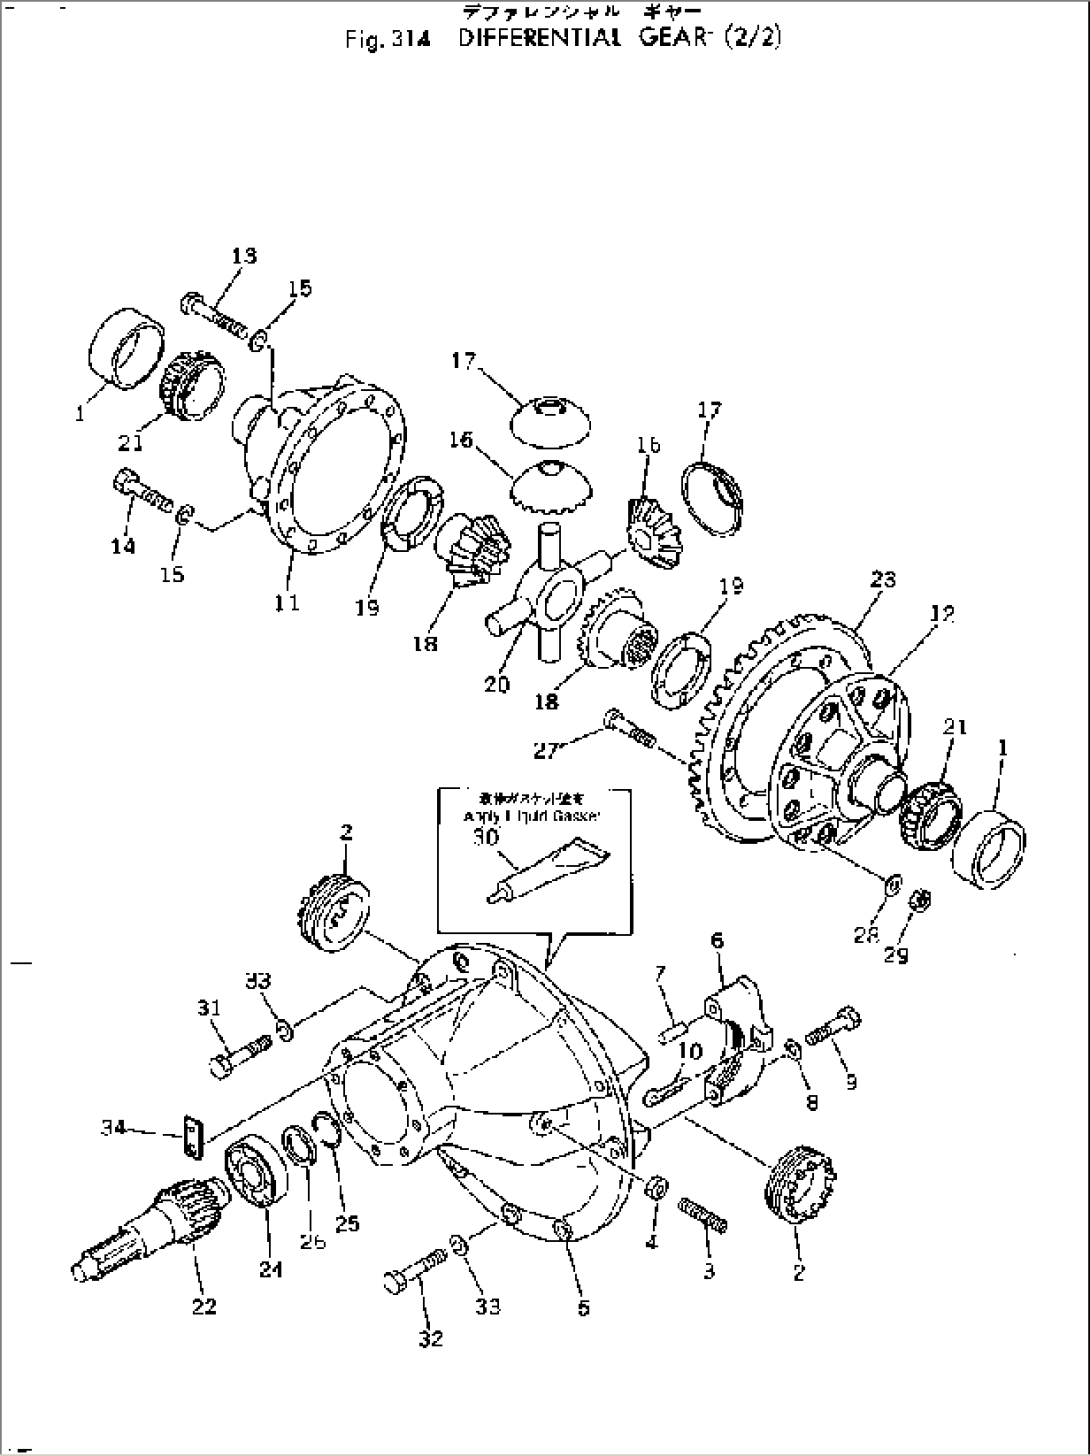 DIFFERENTIAL GEAR (2/2)(#10001-)